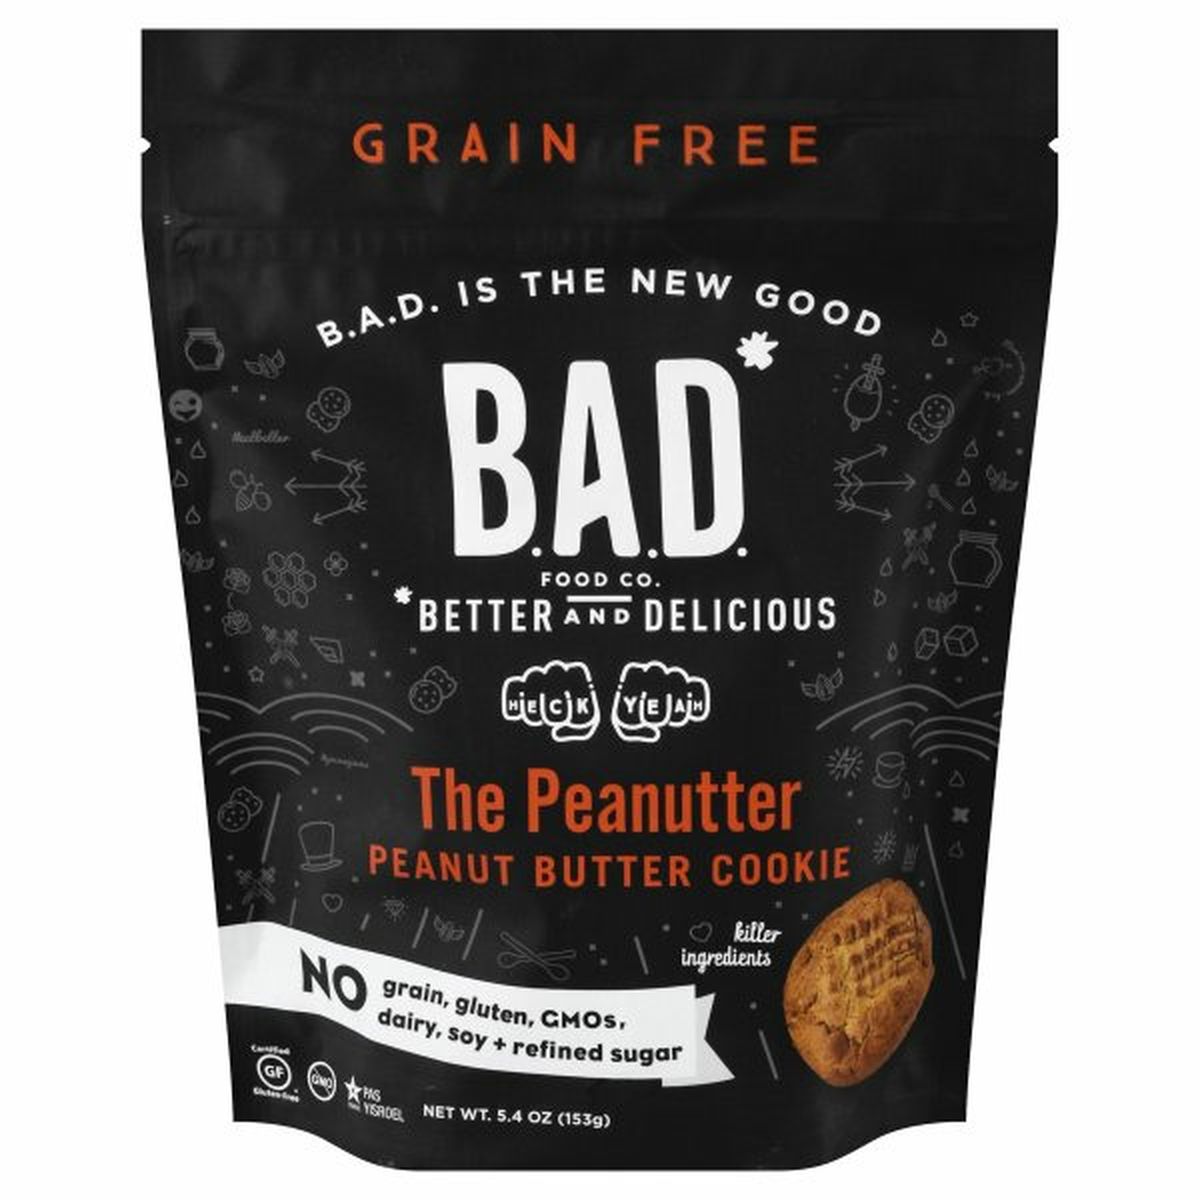 Calories in B.A.D. Food Co. Cookie, Grain Free, The Peanutter